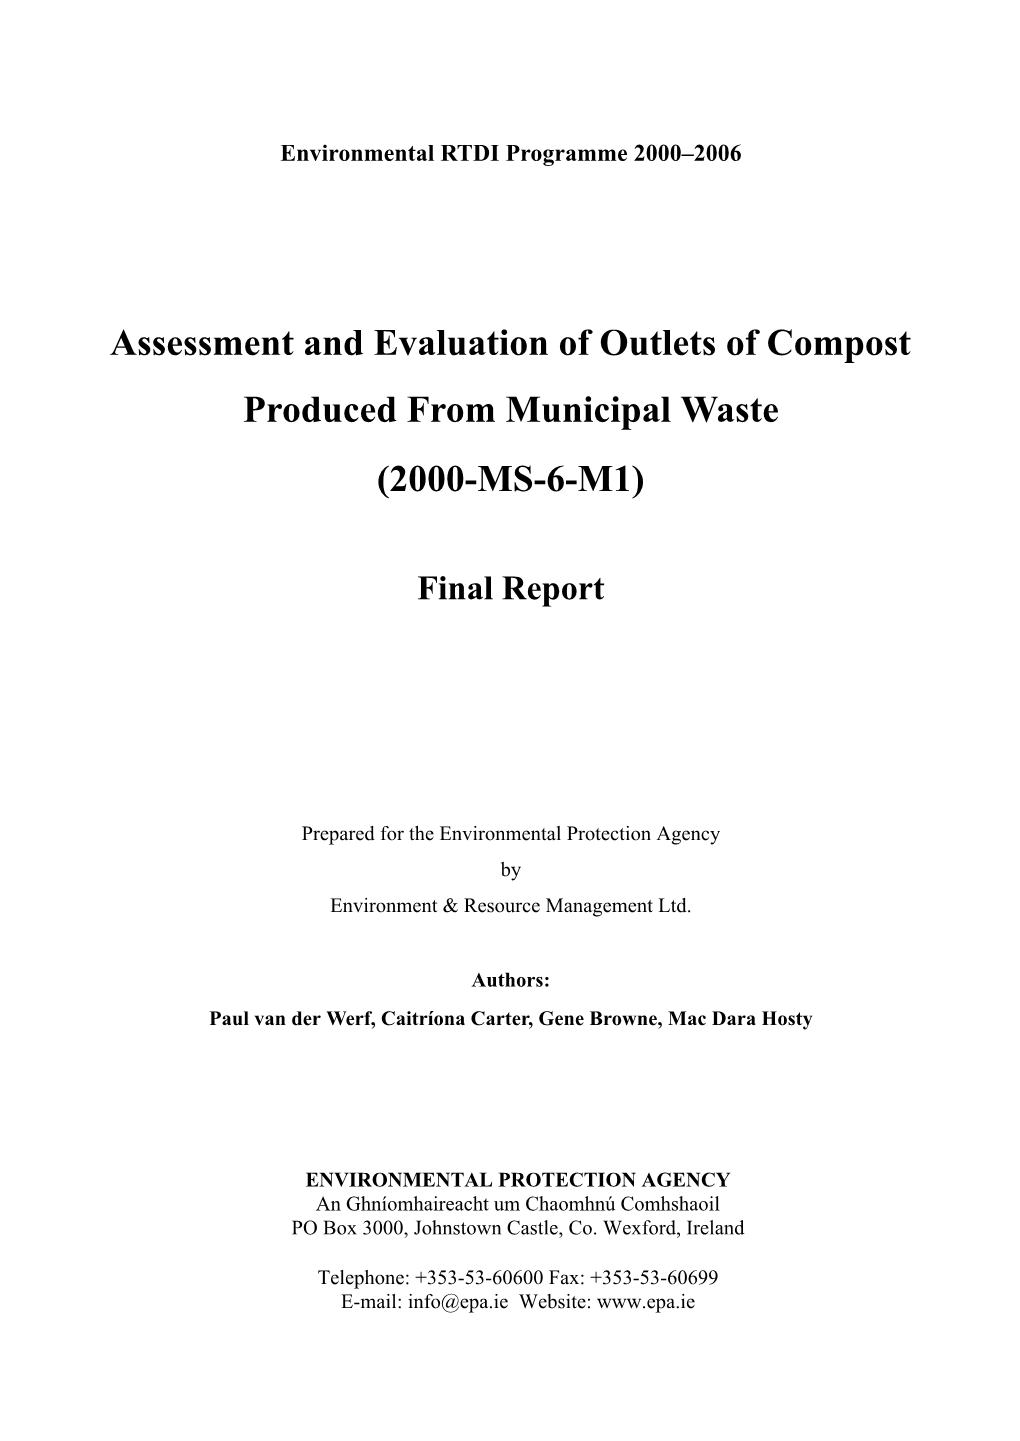 Assessment and Evaluation of Outlets of Compost Produced from Municipal Waste (2000-MS-6-M1)